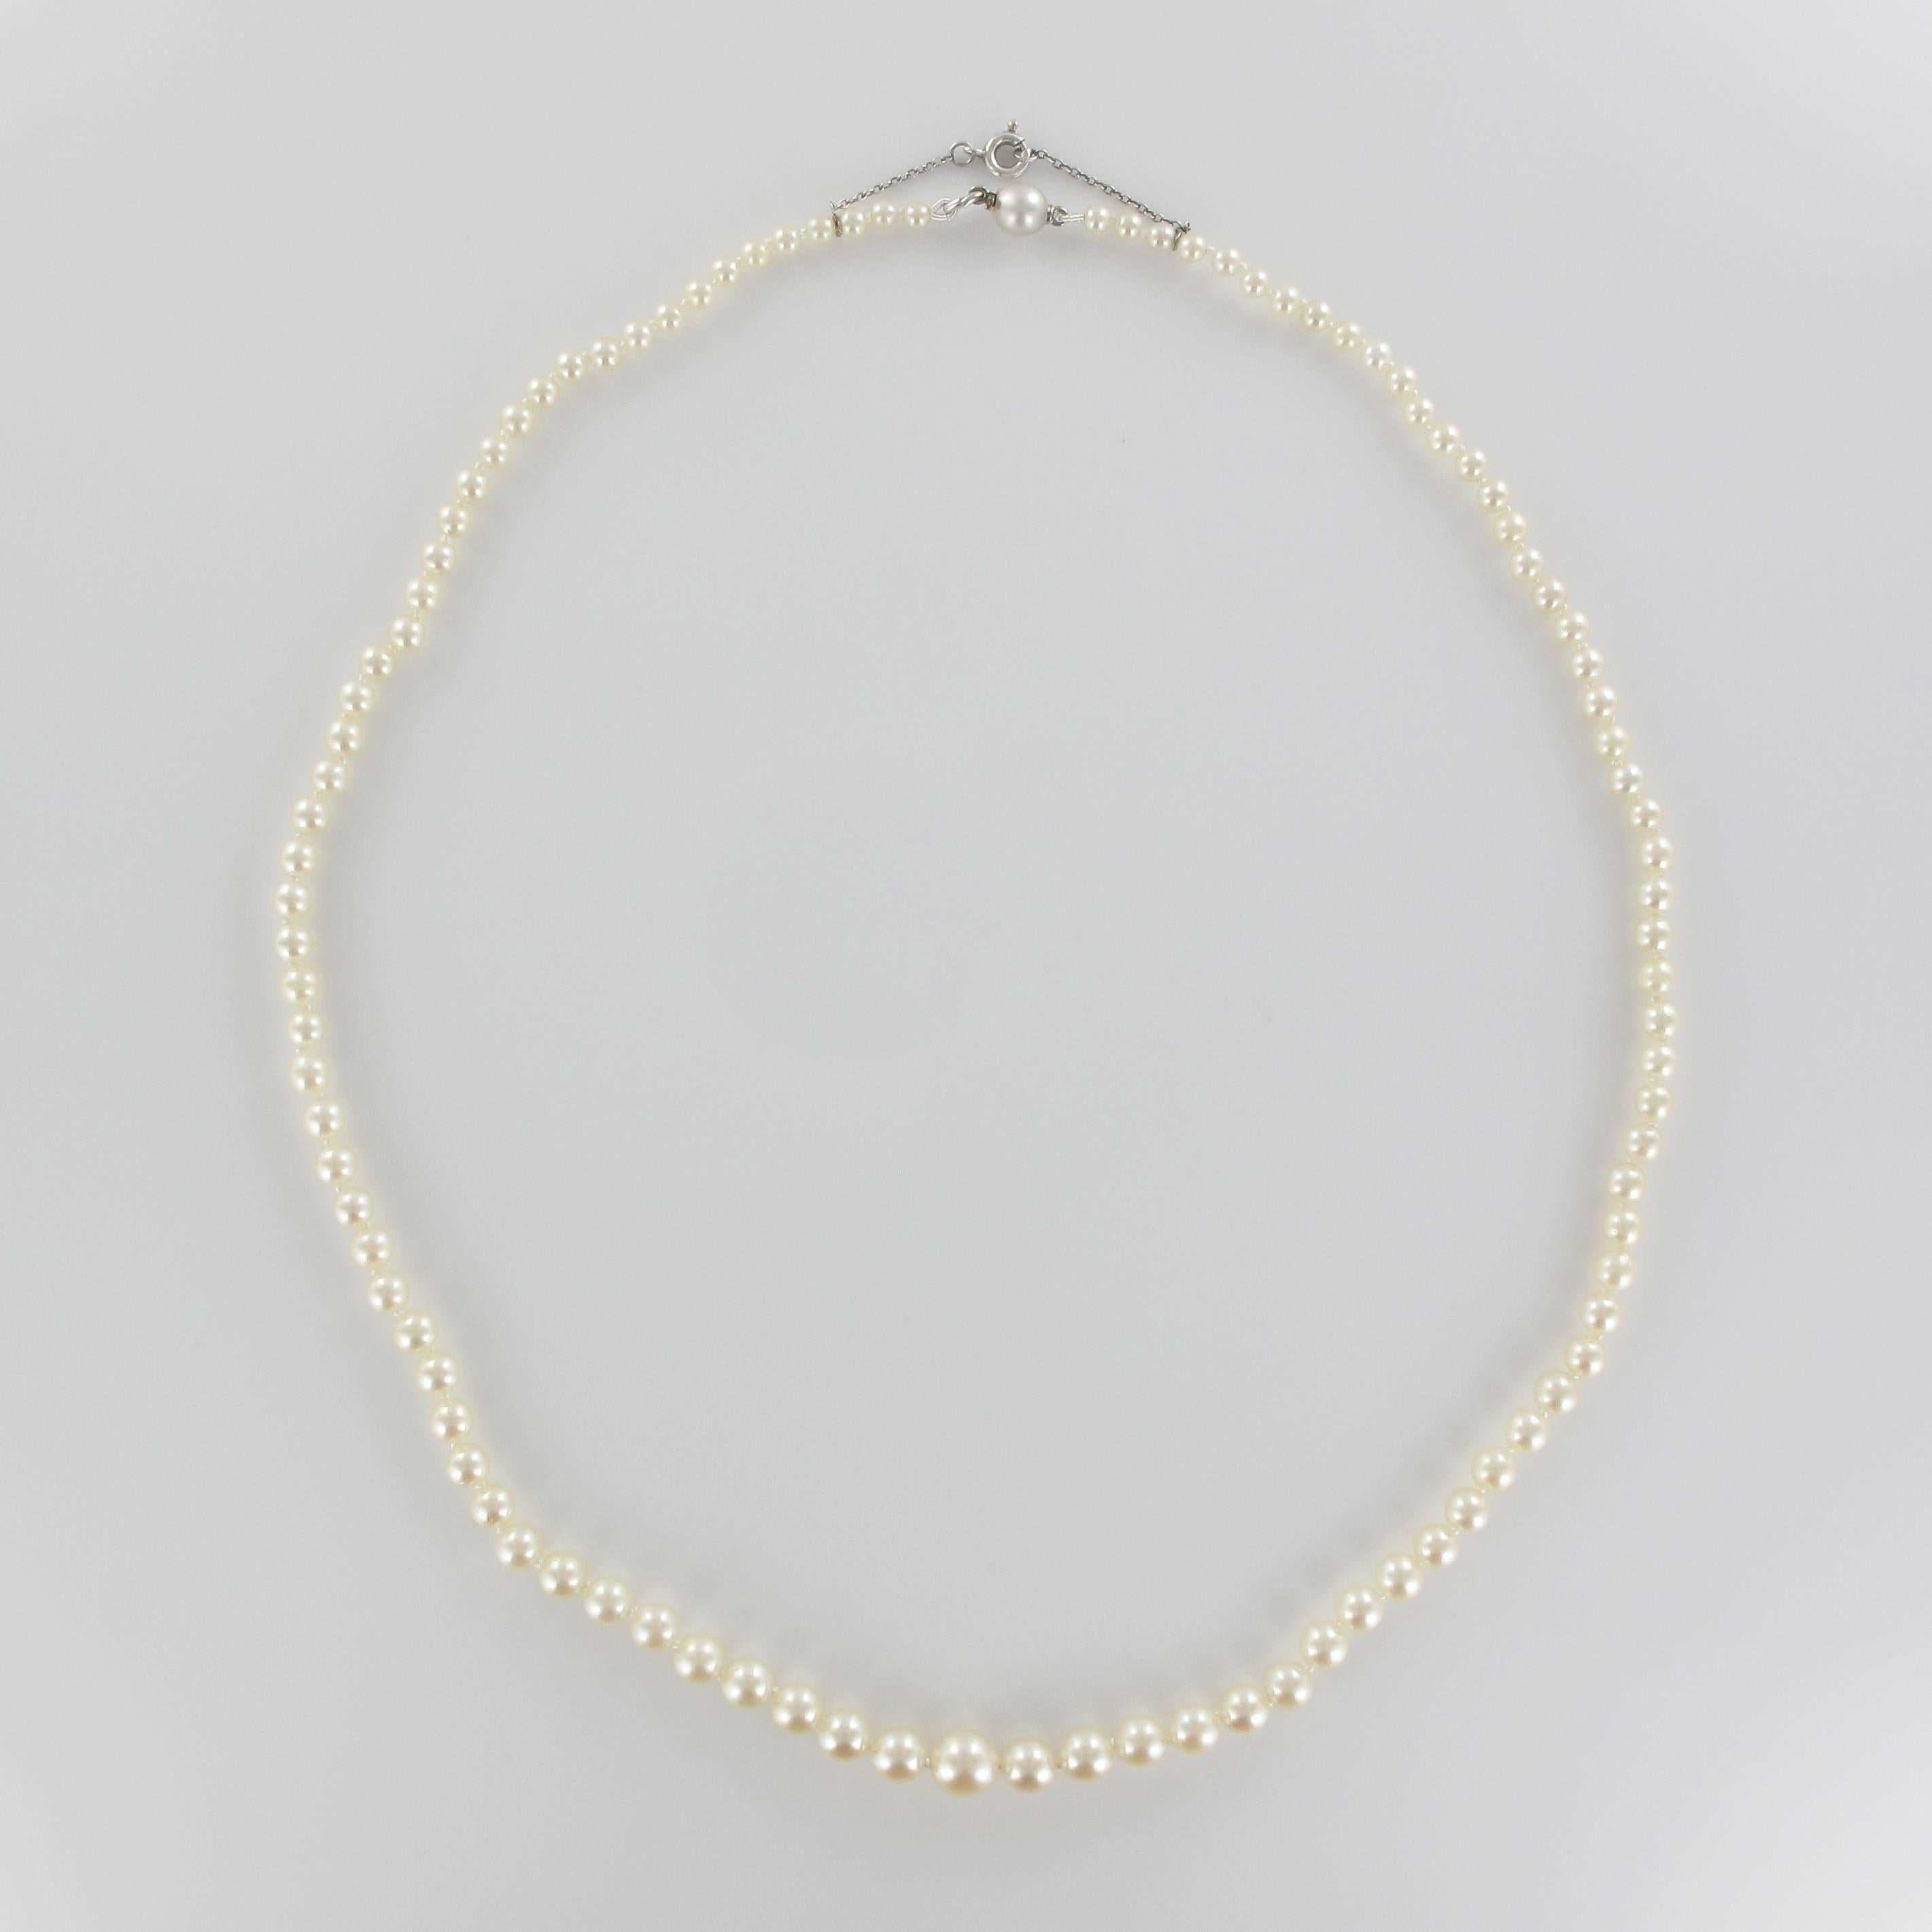 Women's 1930s Japanese Cultured Round White Pearl Necklace